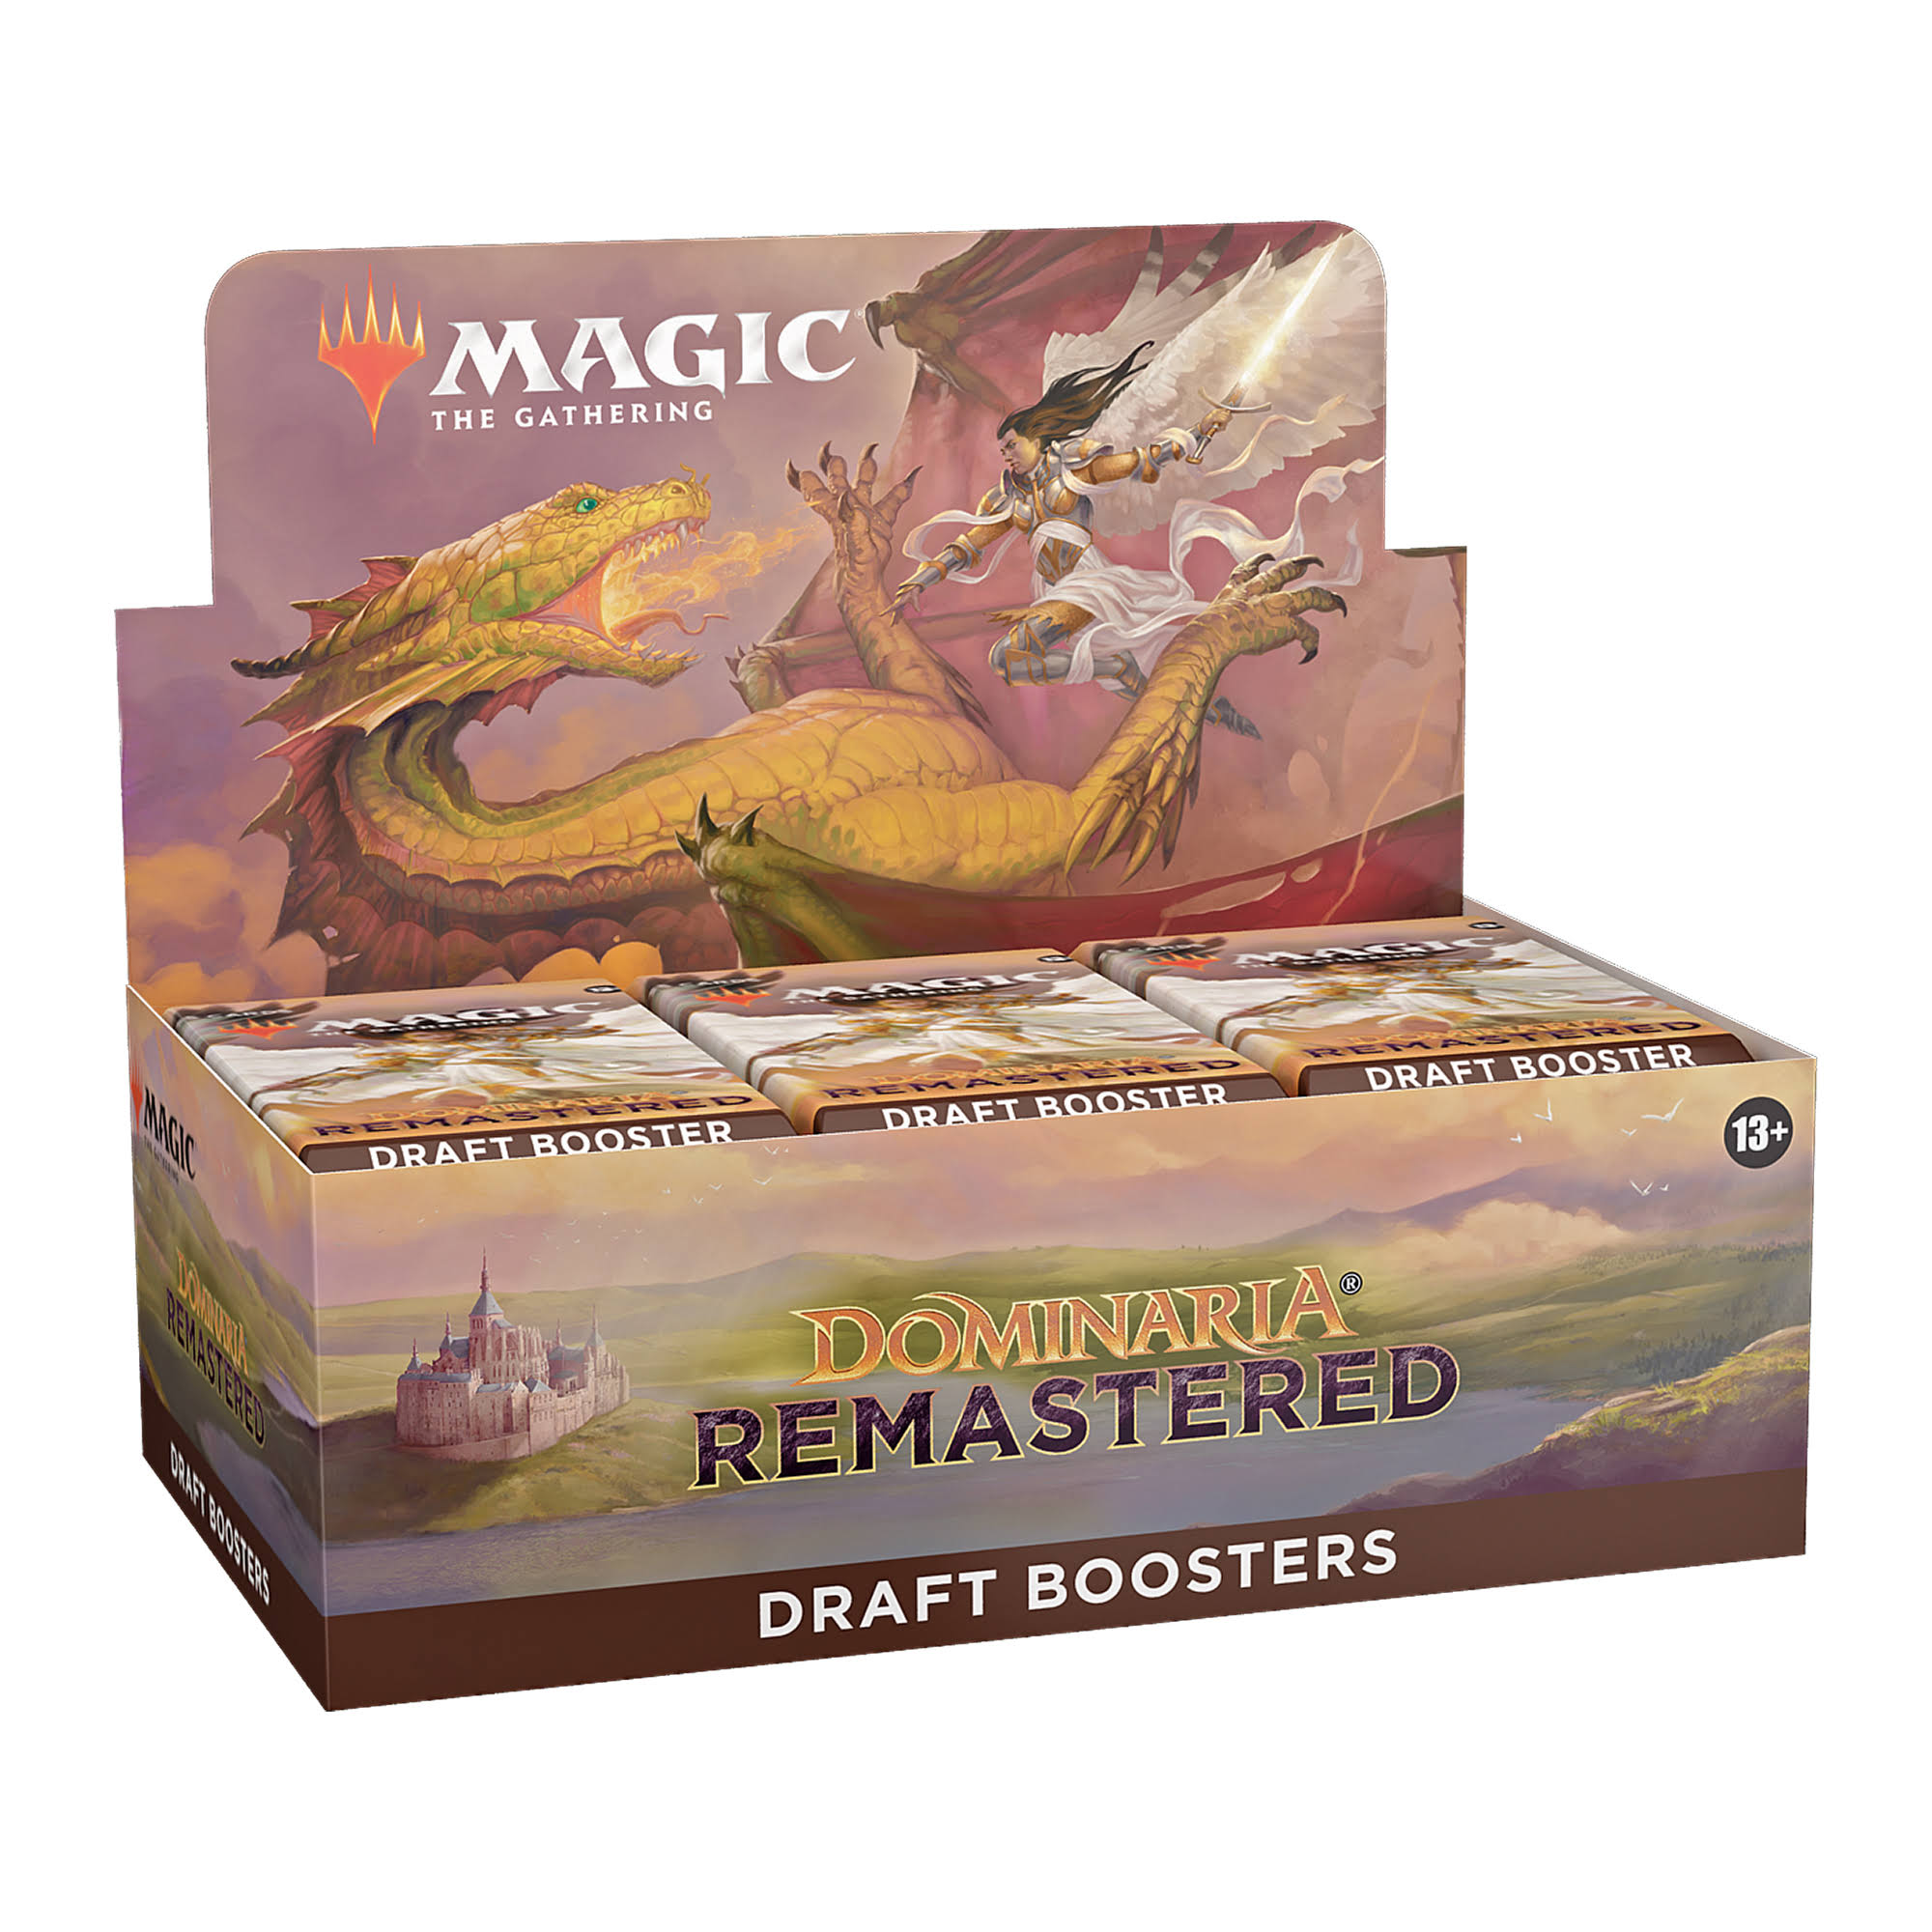 Magic The Gathering D15040000 Dominaria Remastered Draft Booster Box Cardgame